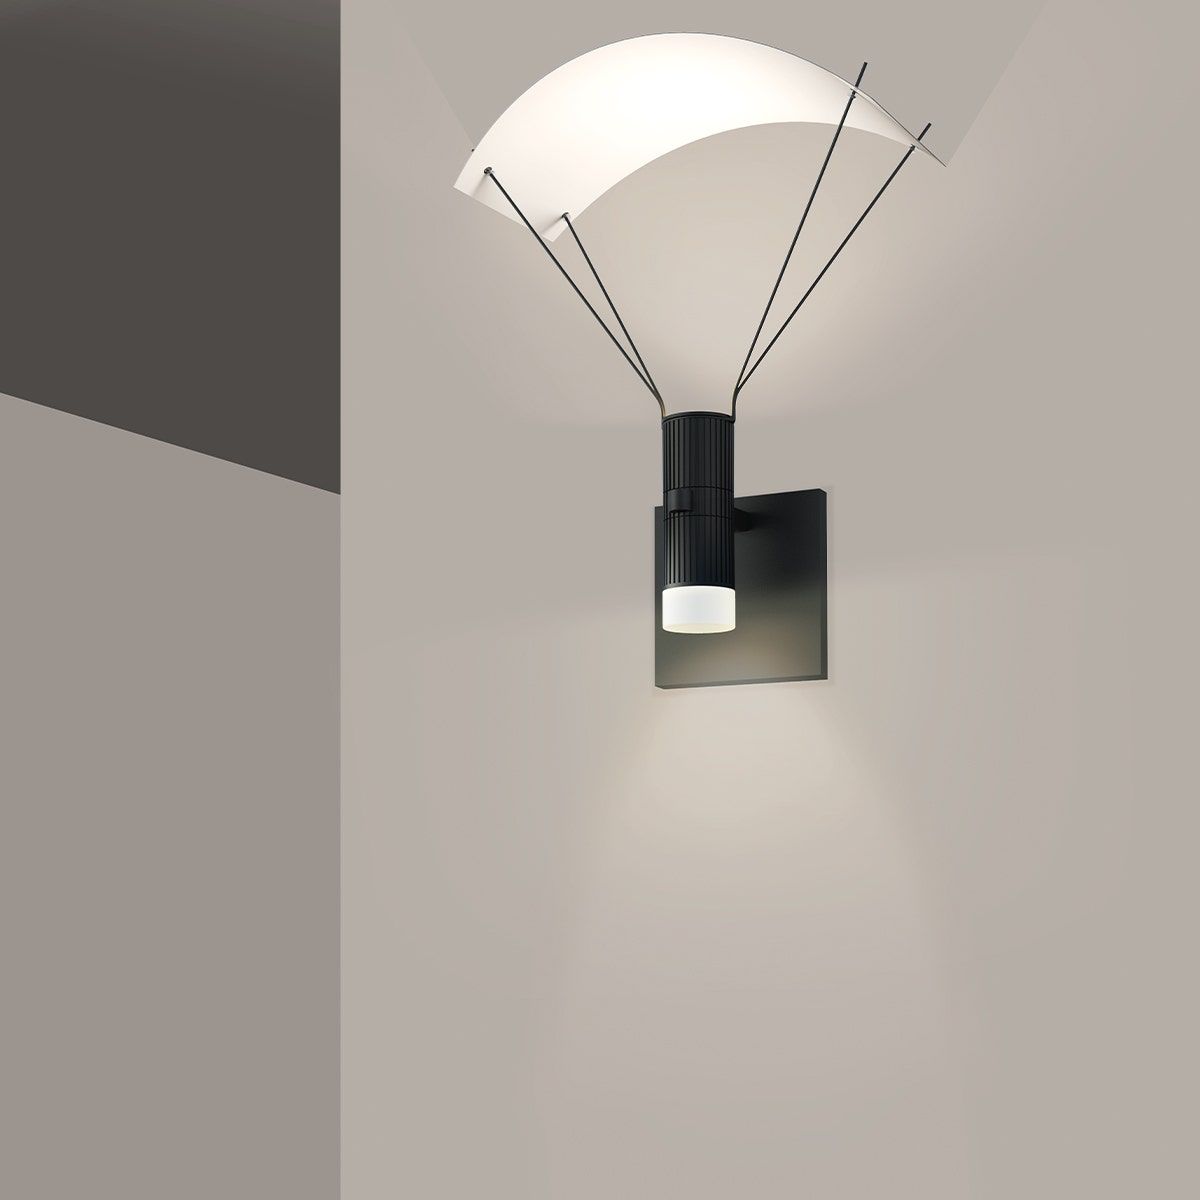 Suspenders Standard Single Sconce with Bar-Mounted Duplex Cylinders with Glass Drum Diffuser & Parachute Reflector